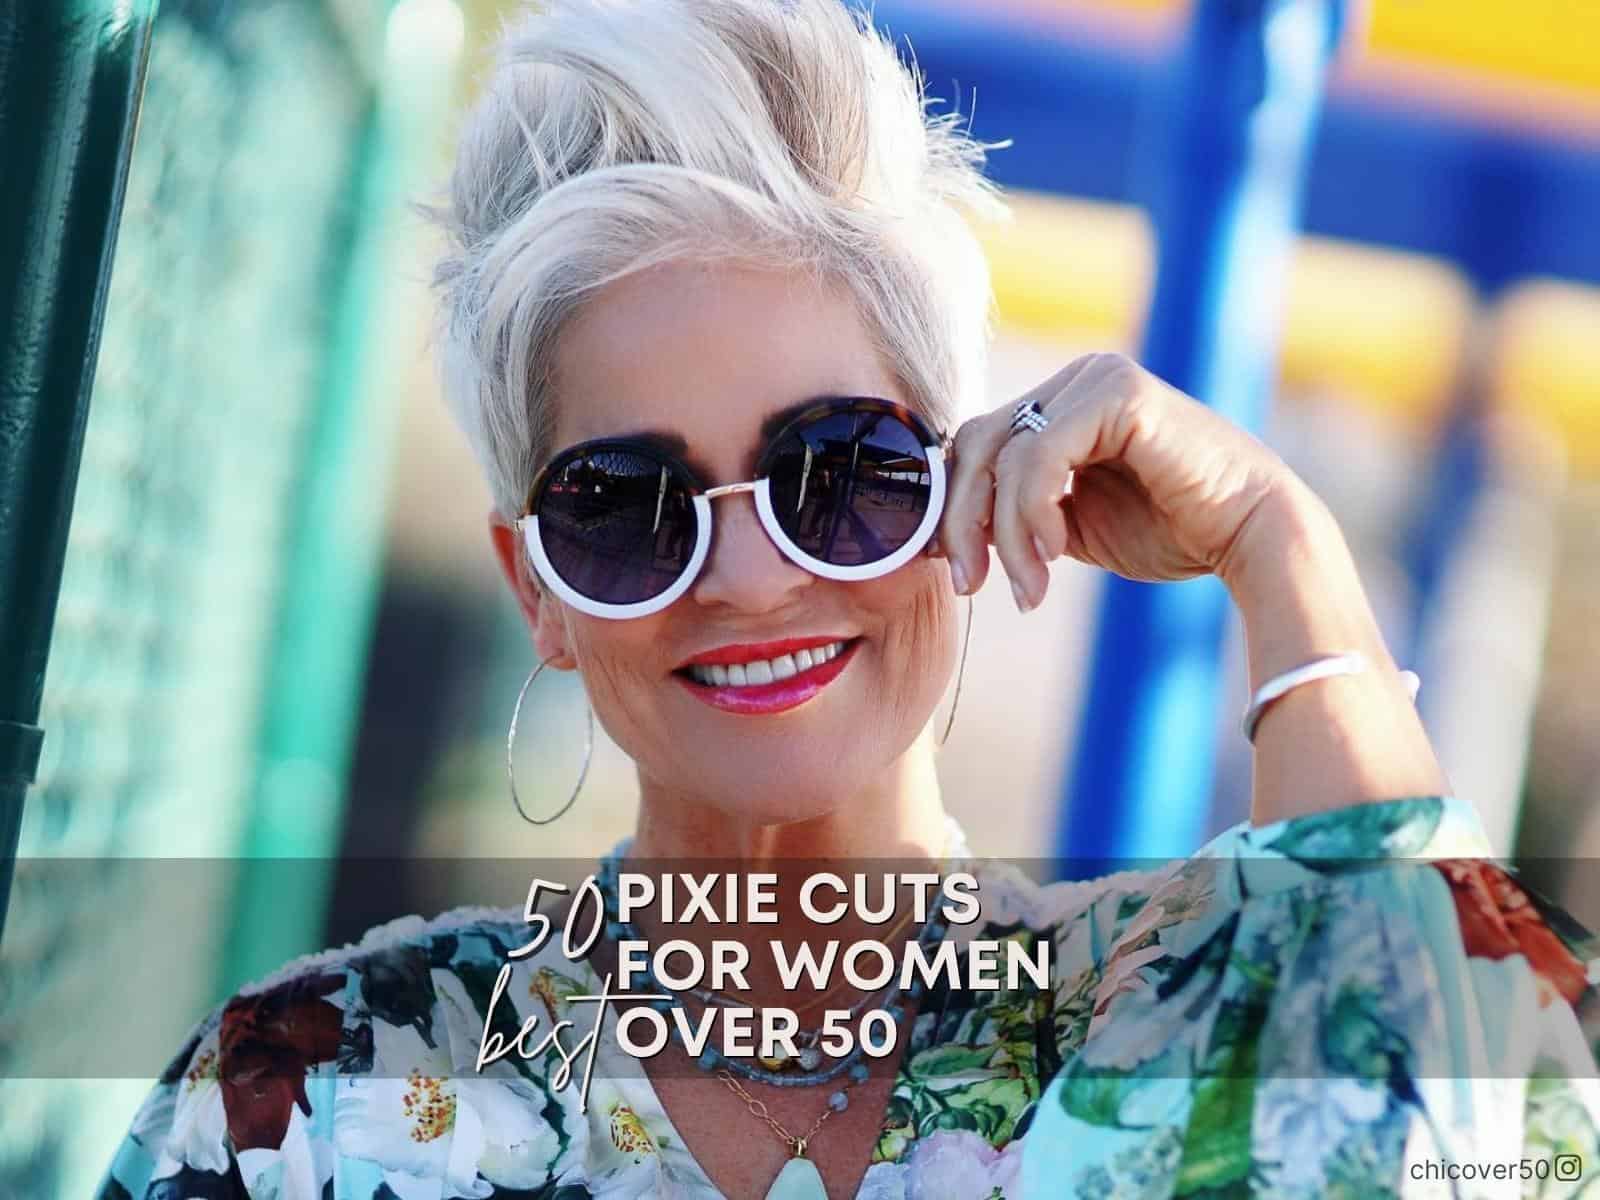 pixie cuts for women over 50